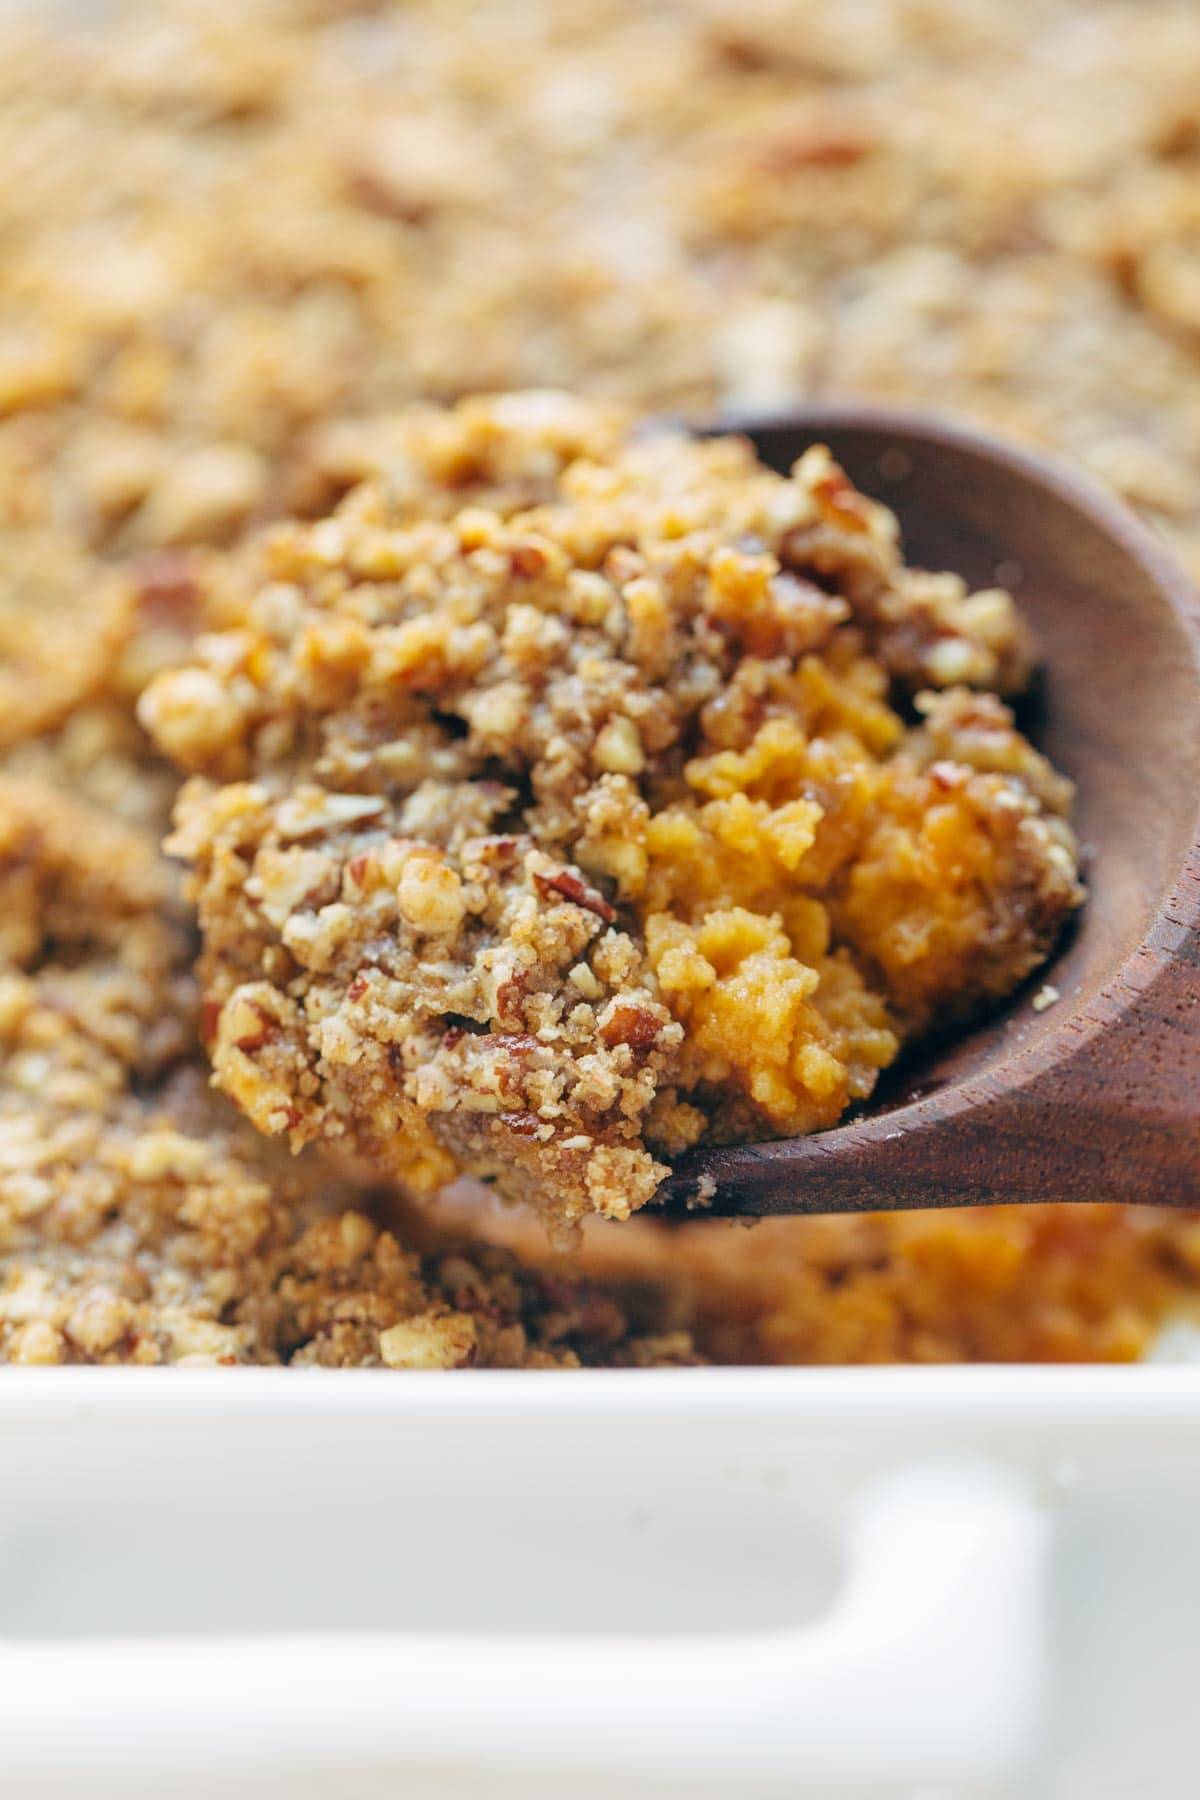 Sweet Potato Casserole with a crunchy brown sugar topping in a wooden spoon